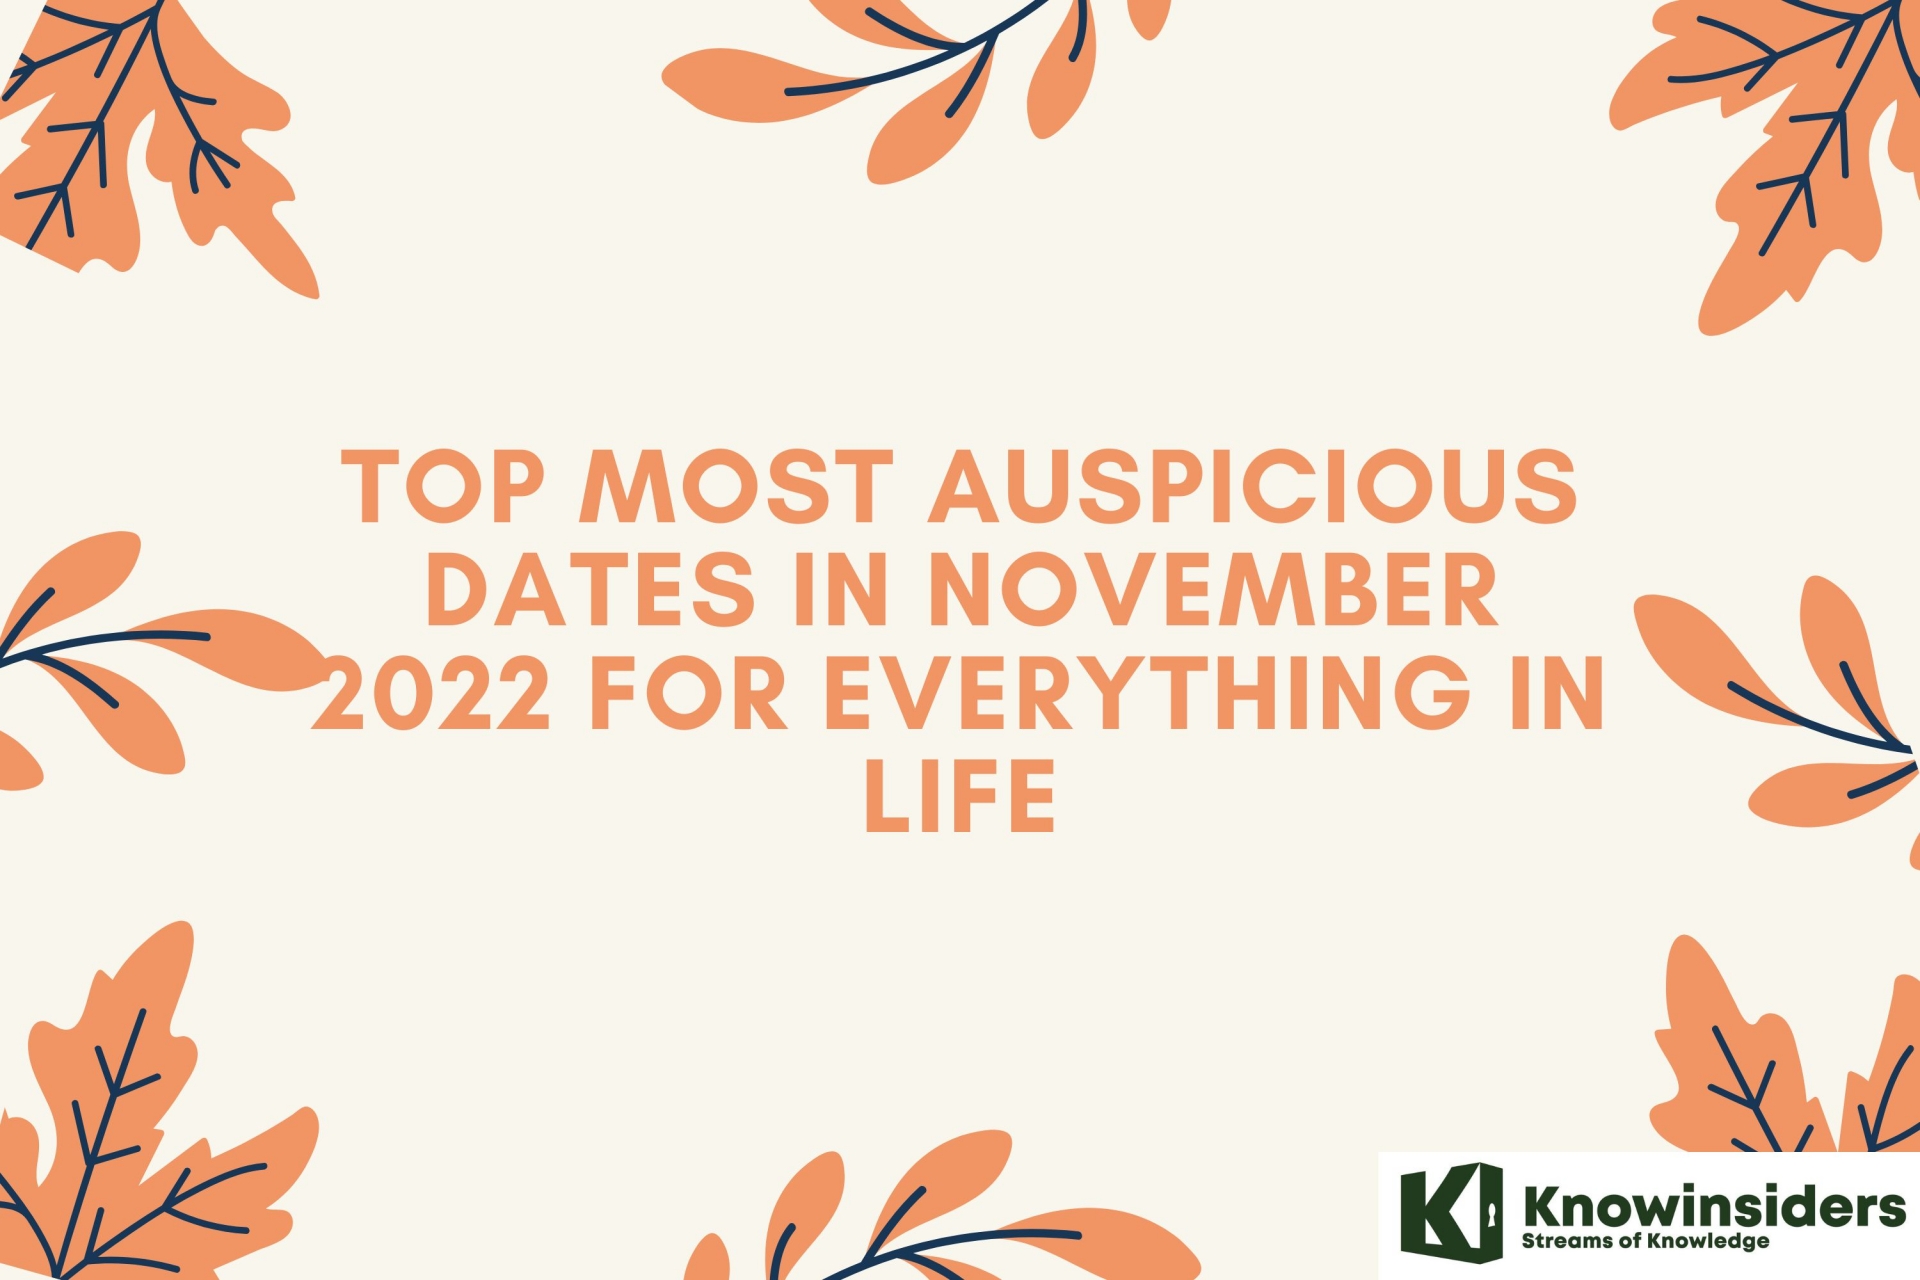 Top Most Auspicious Dates In November 2022 For Everything in Life